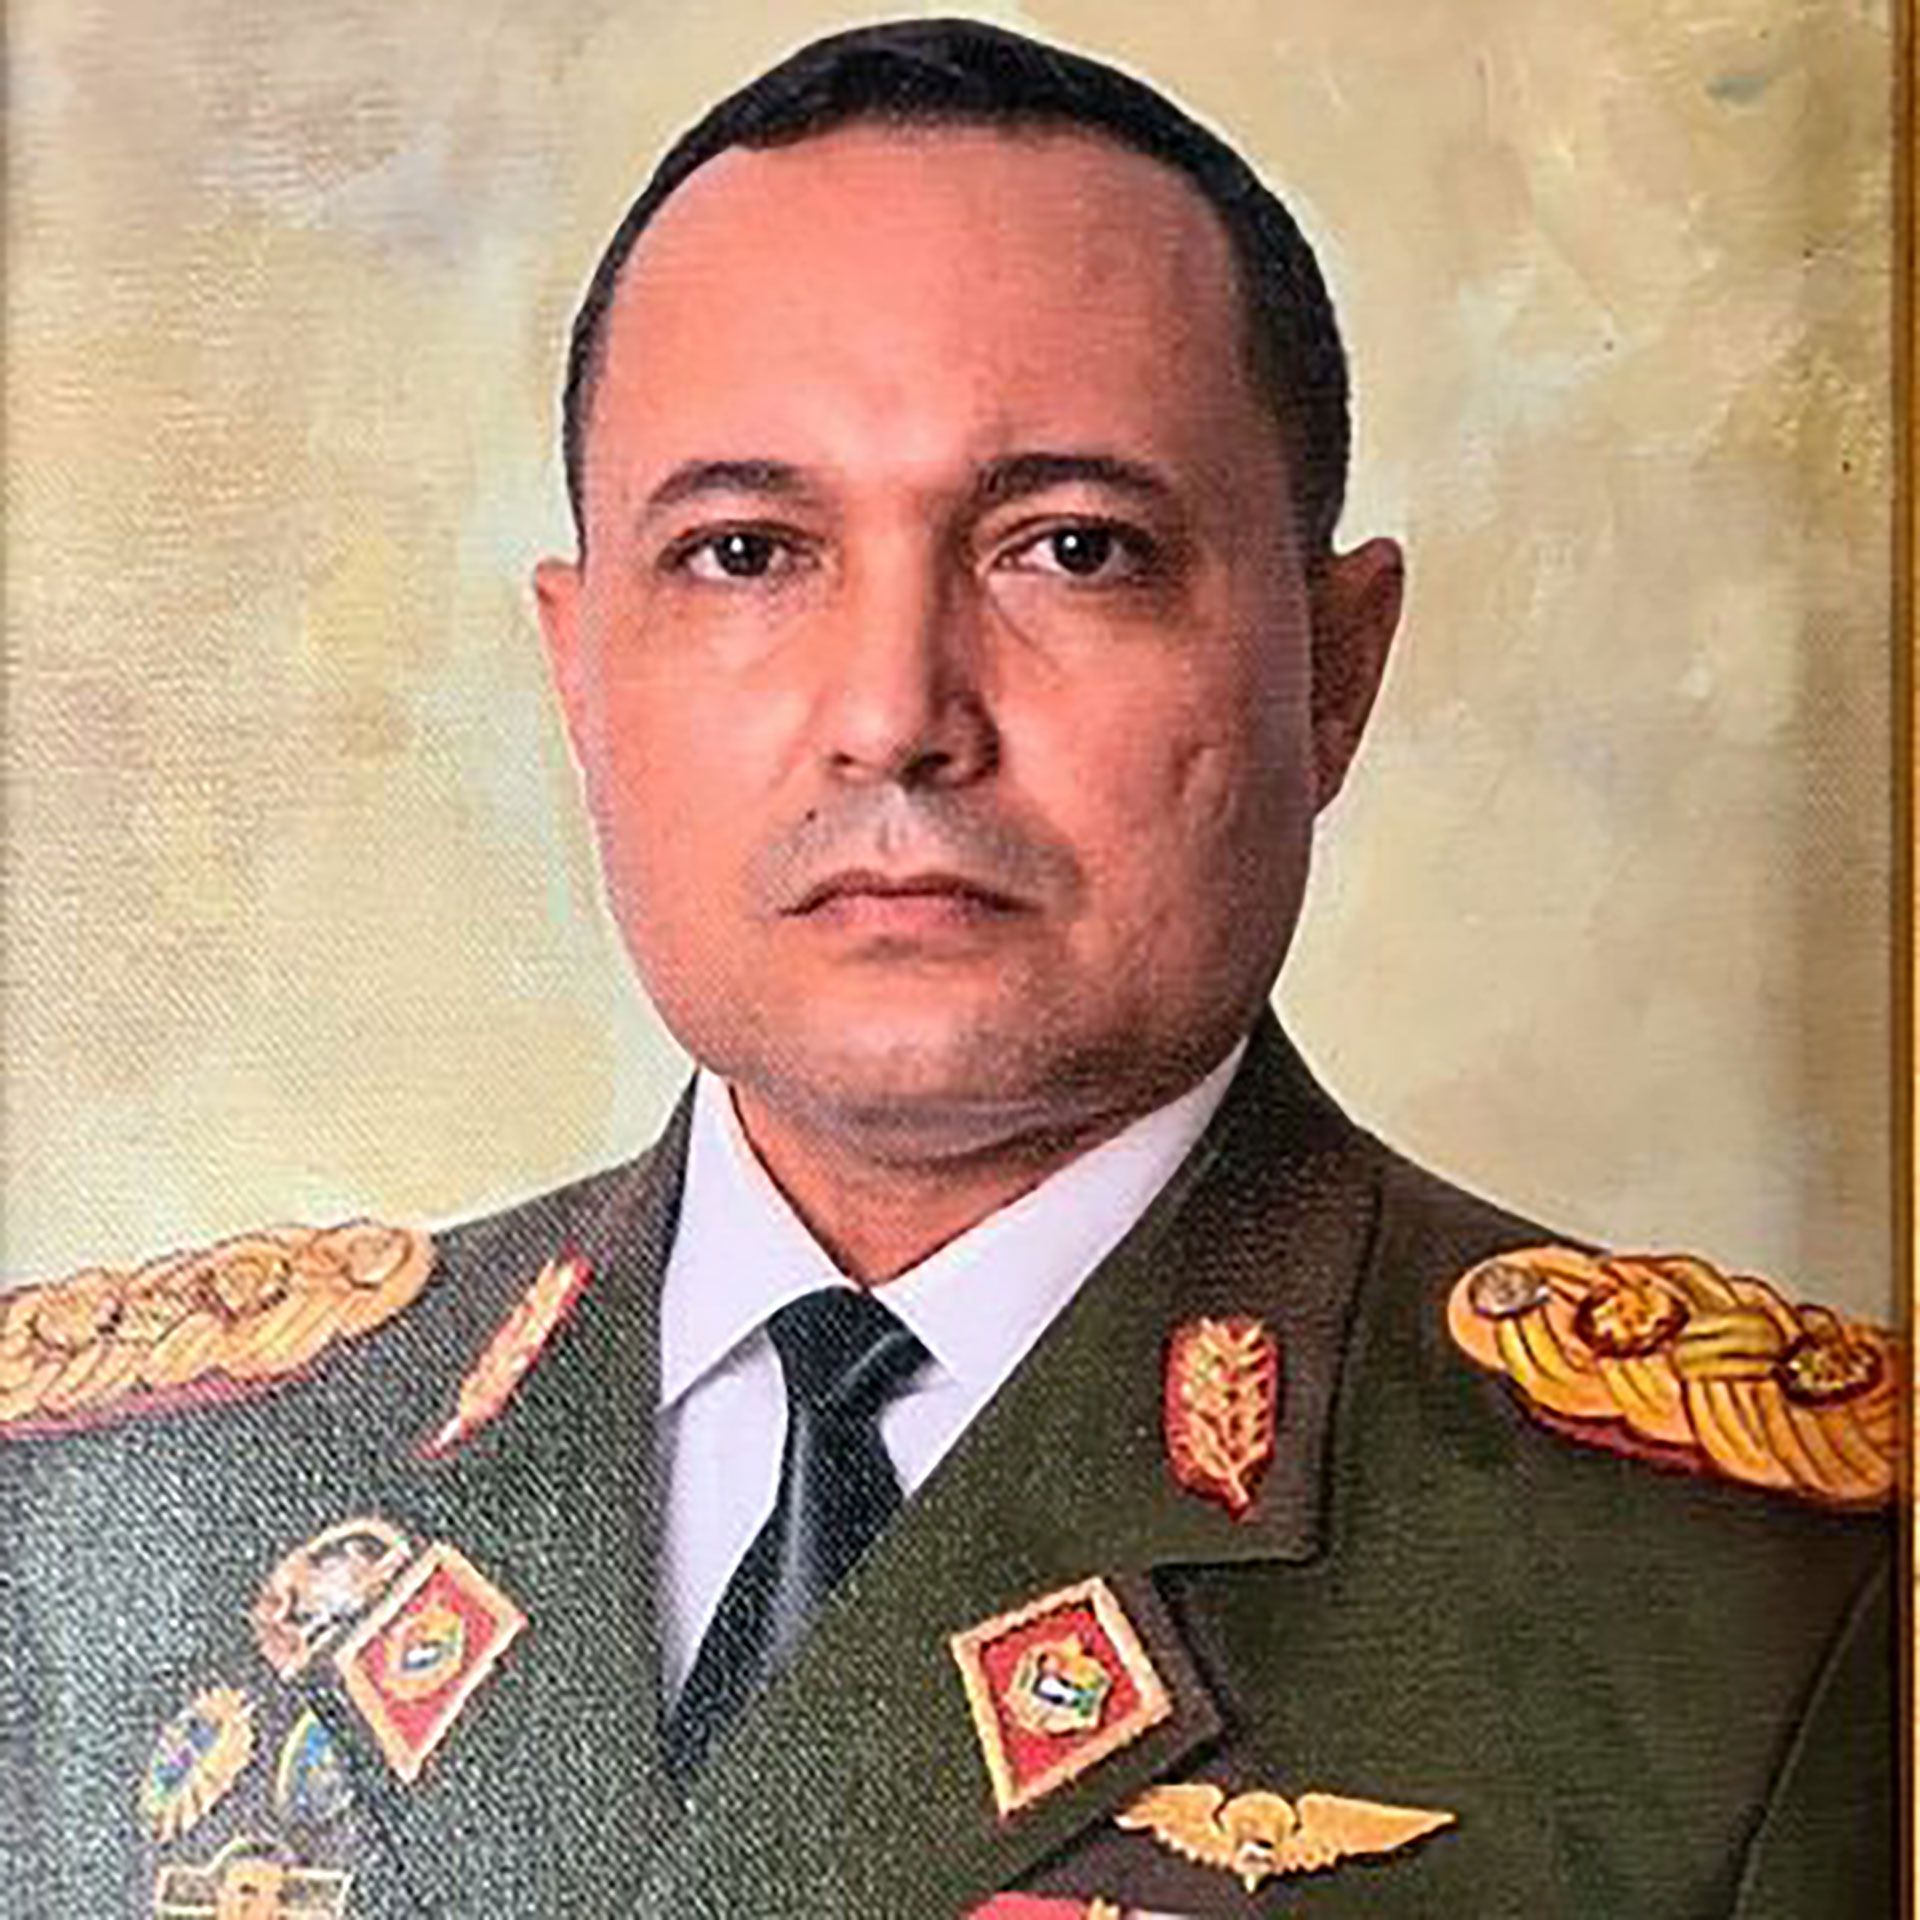 Major General (GD) Johnny Alberto Núñez Rincón at the head of the Sixth Army Corps of Engineers